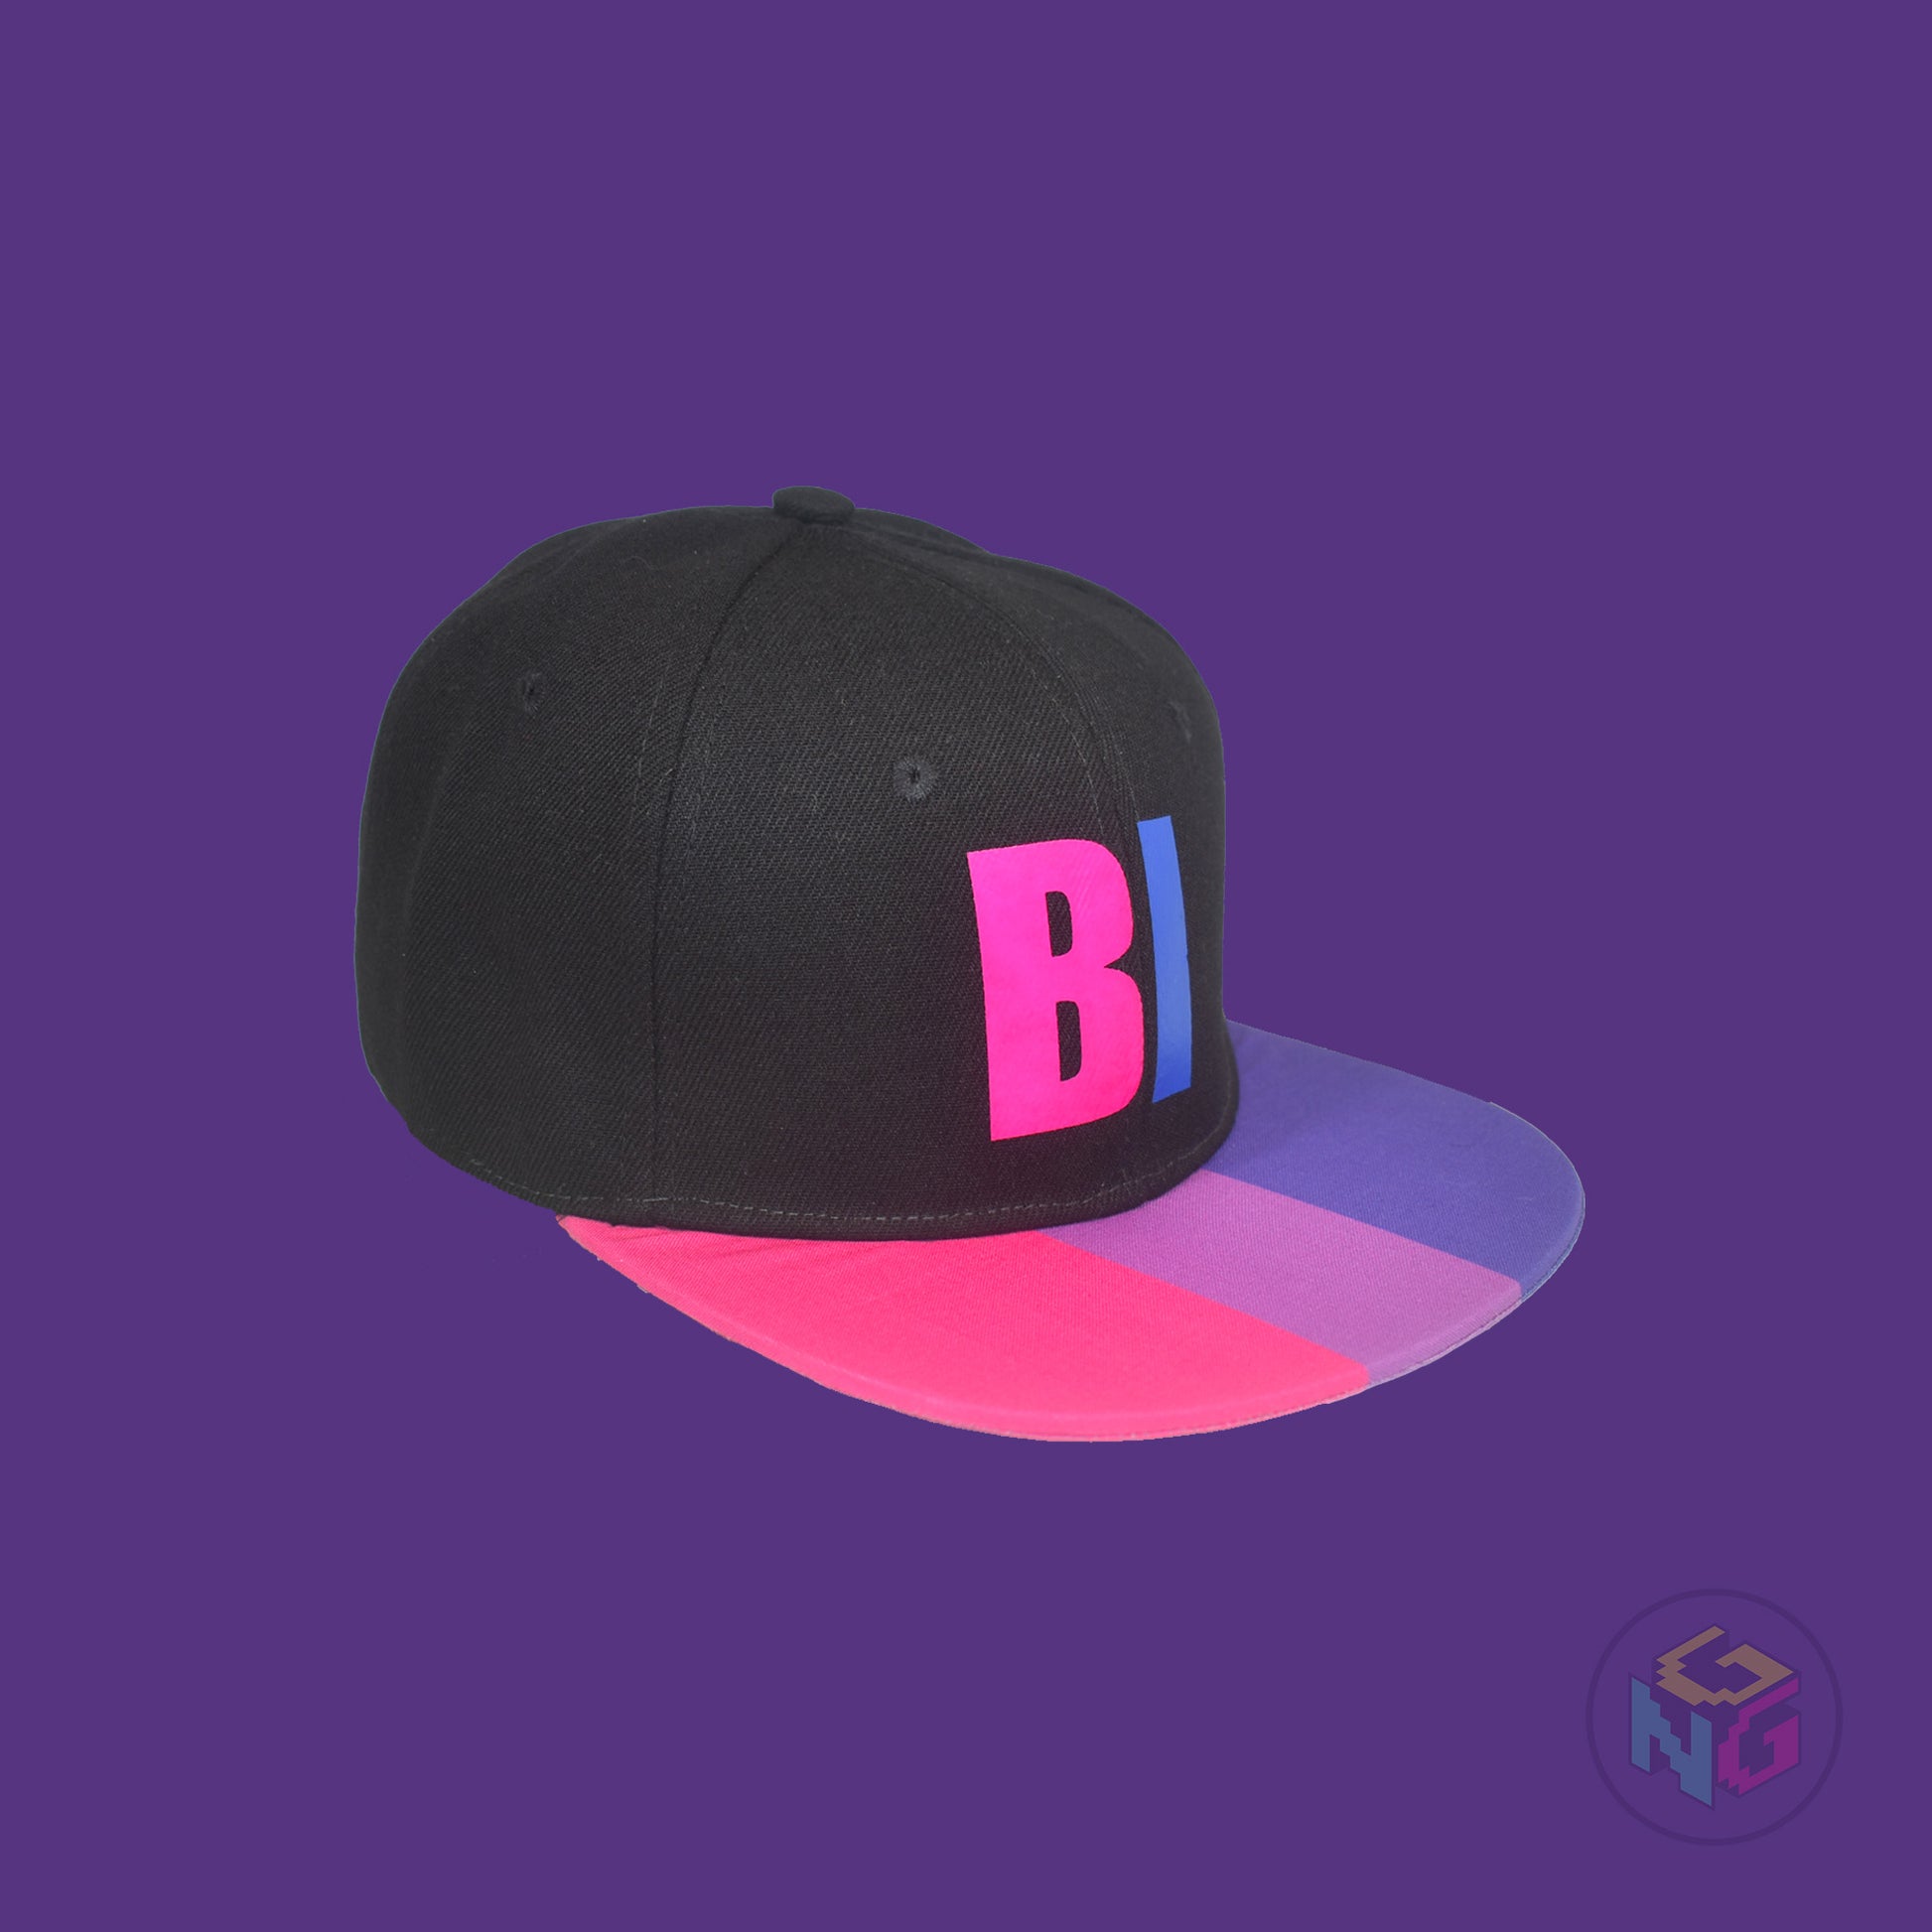 Black flat bill snapback hat. The brim has the bisexual pride flag on both sides and the front of the hat has the word “BI” in pink and blue. Front right view